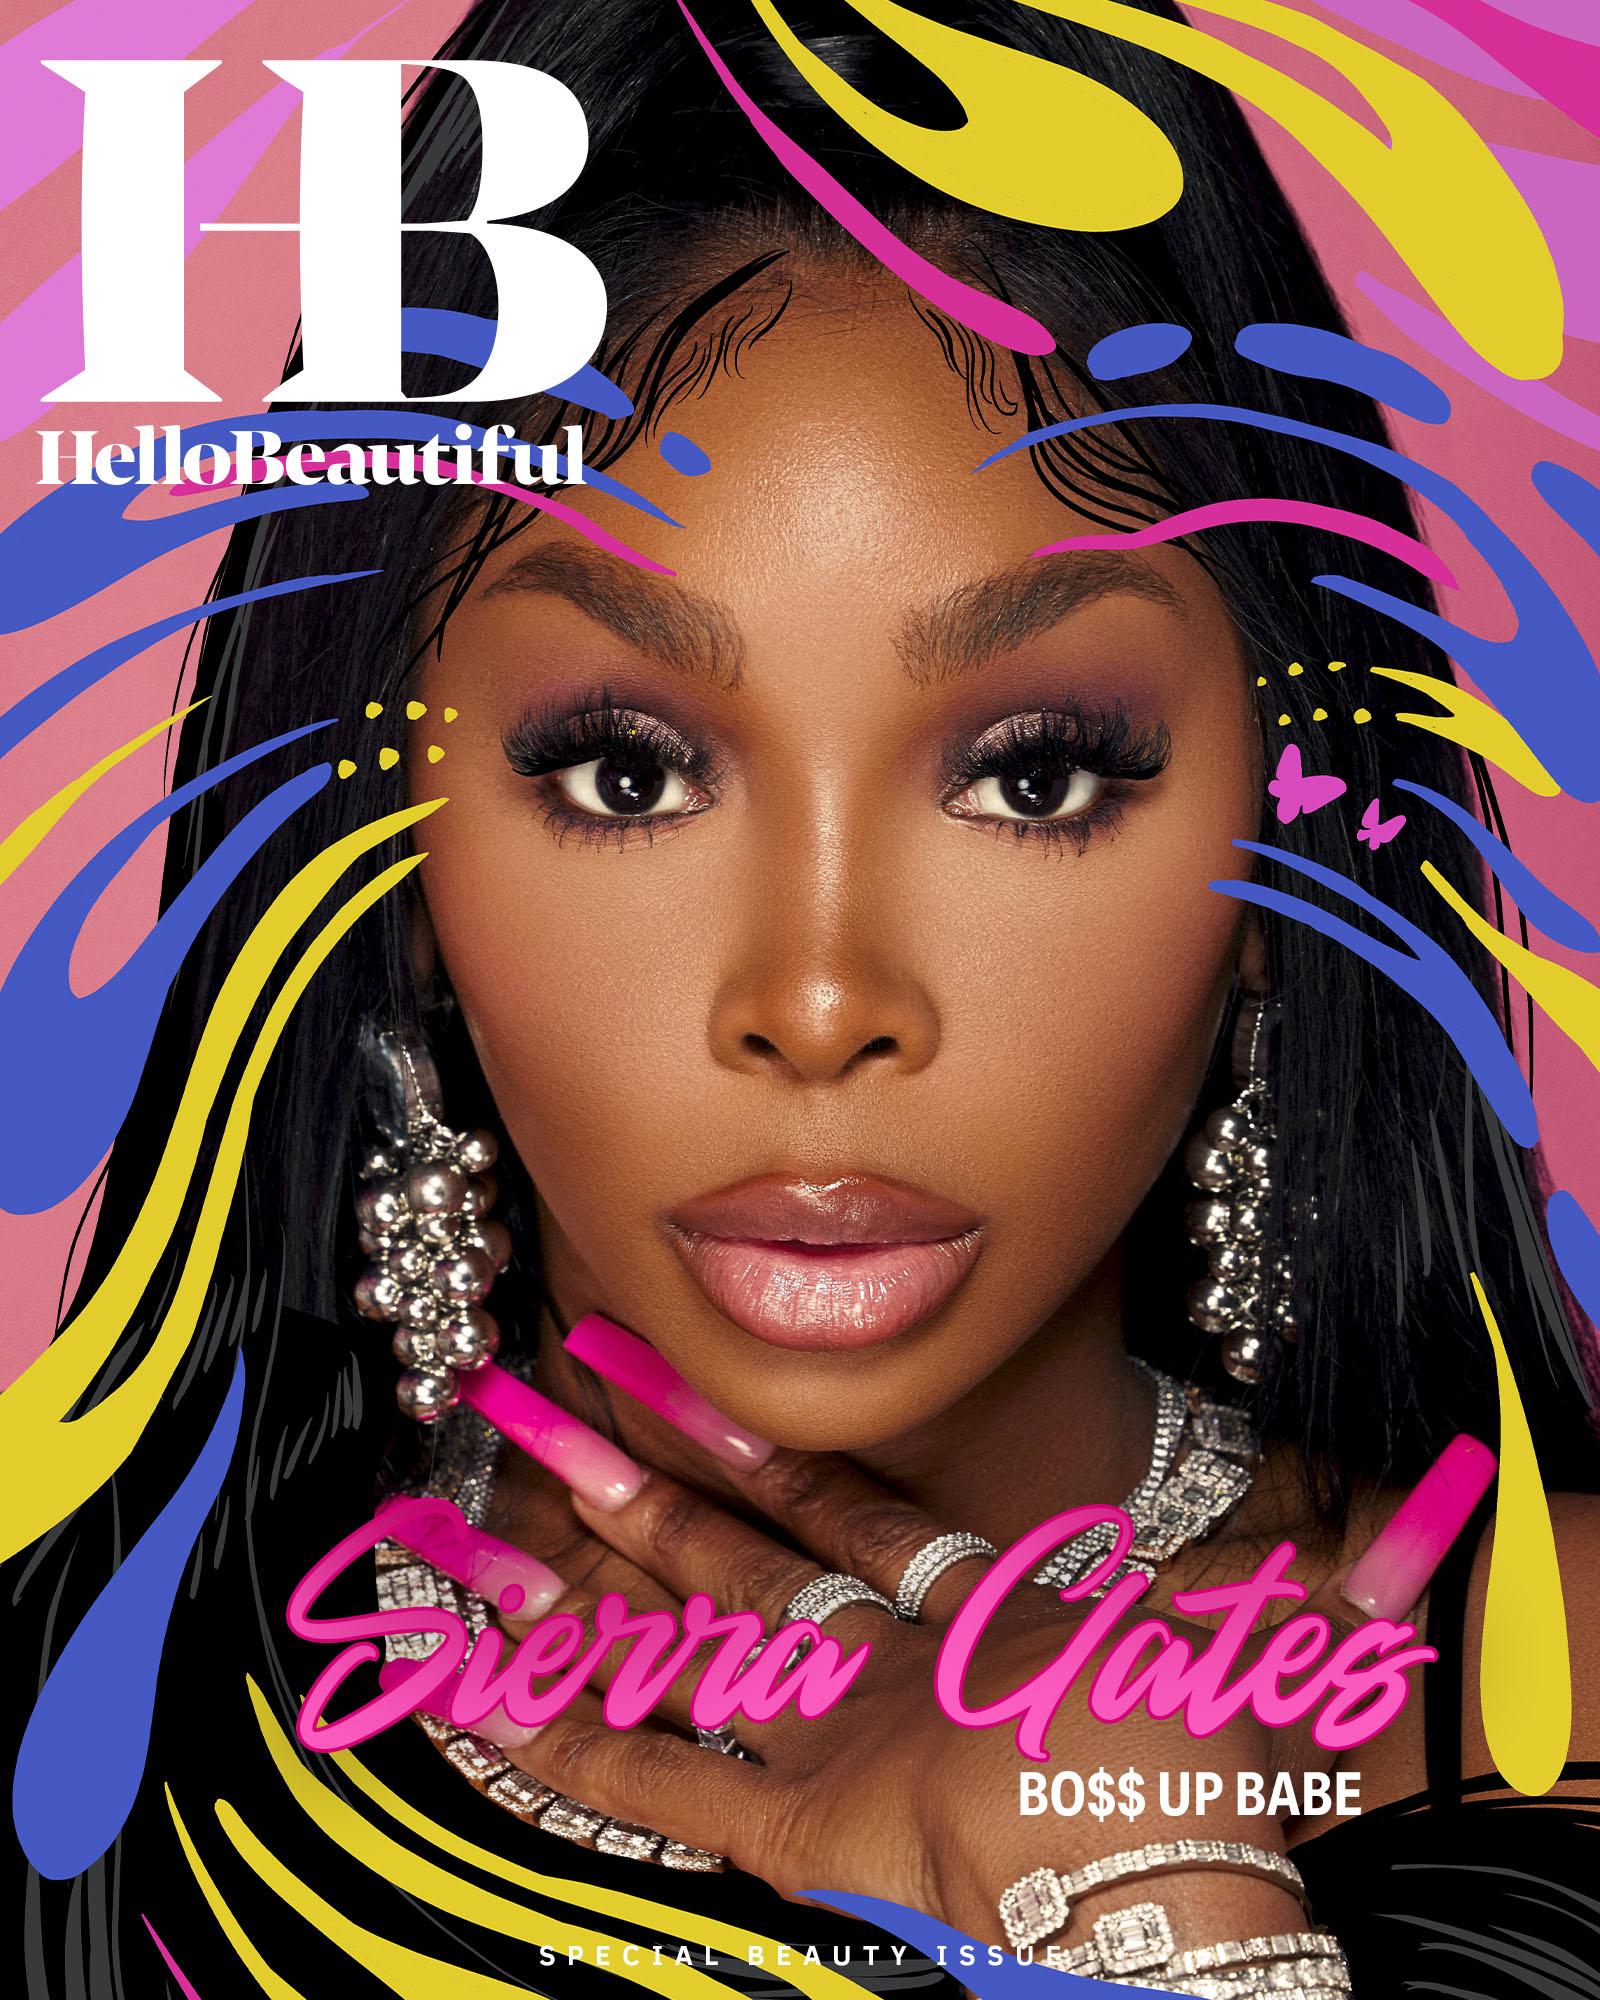 Sierra Gates Special Beauty Cover